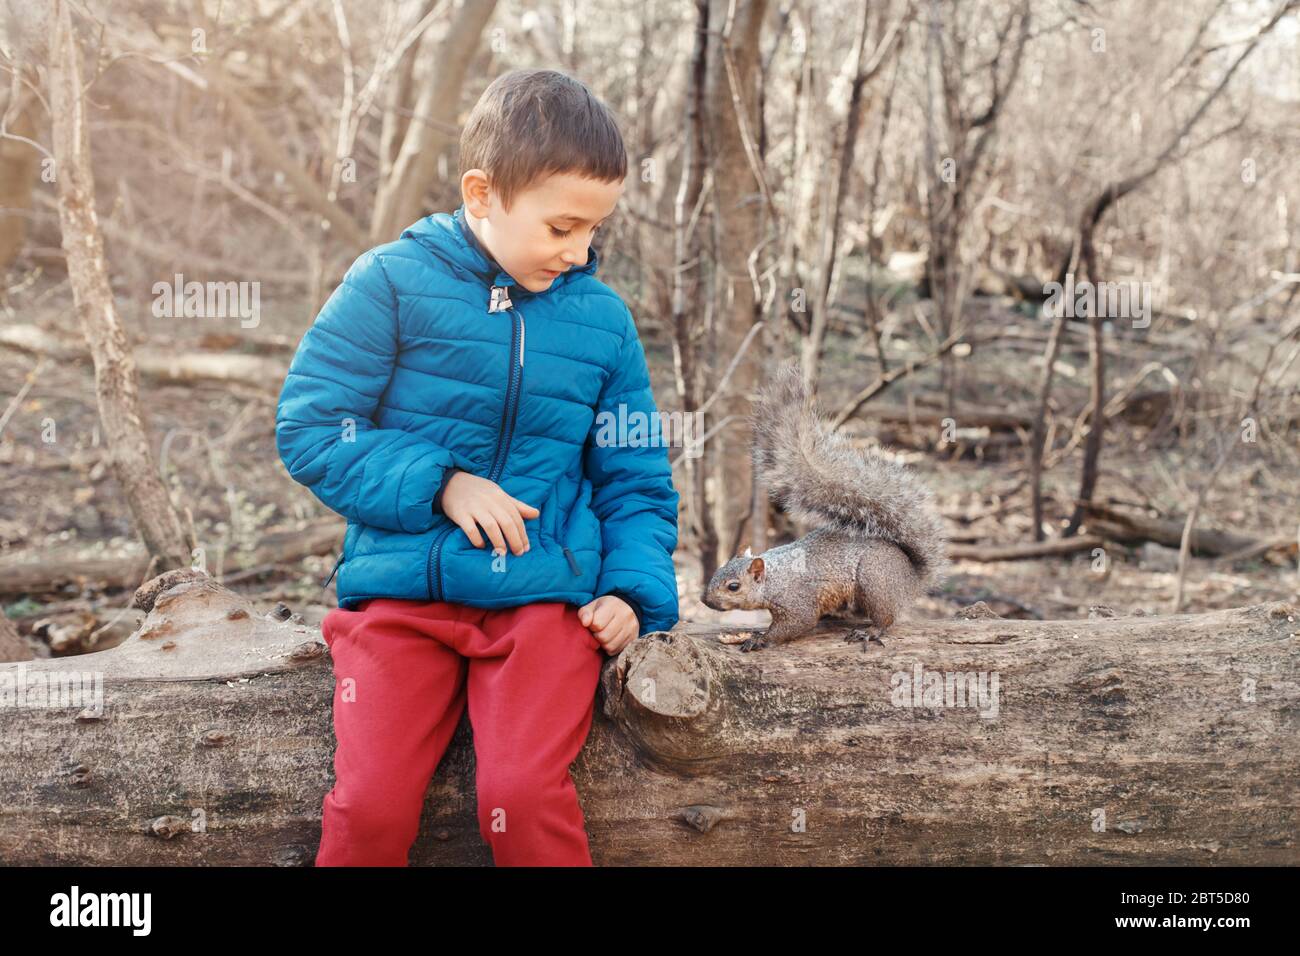 Cute Caucasian boy feeding grey squirrel in park. Adorable little kid giving food nuts to wild animal in forest. Child learning studying wild nature a Stock Photo